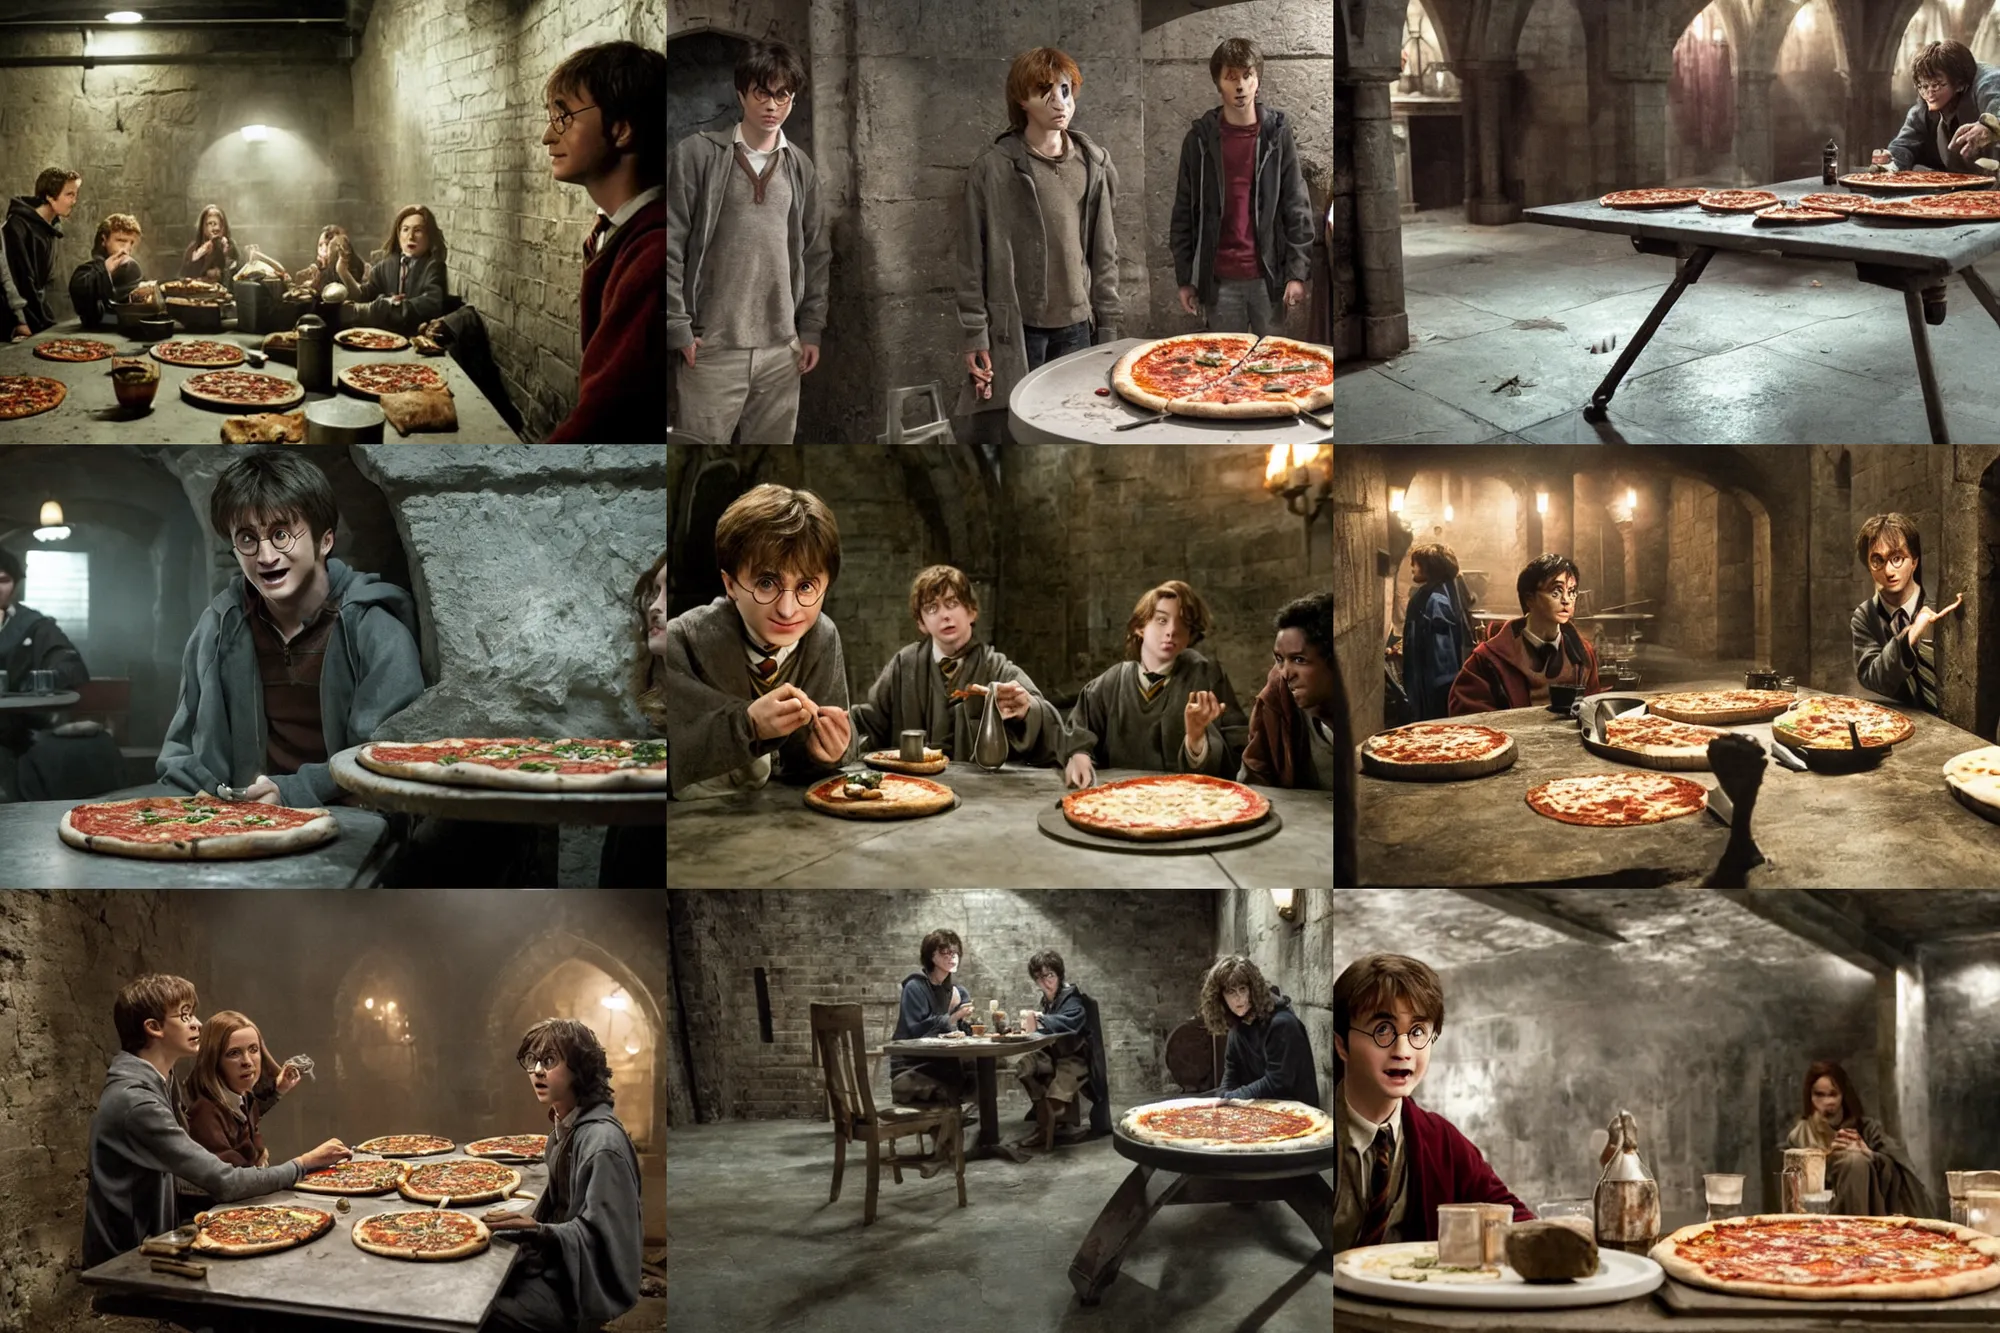 Prompt: Harry potter film, a scene where Harry is eating in a Concrete wall basement, Pizza is placed on a small aluminum table placed in the center, Dark cinematic color tones.